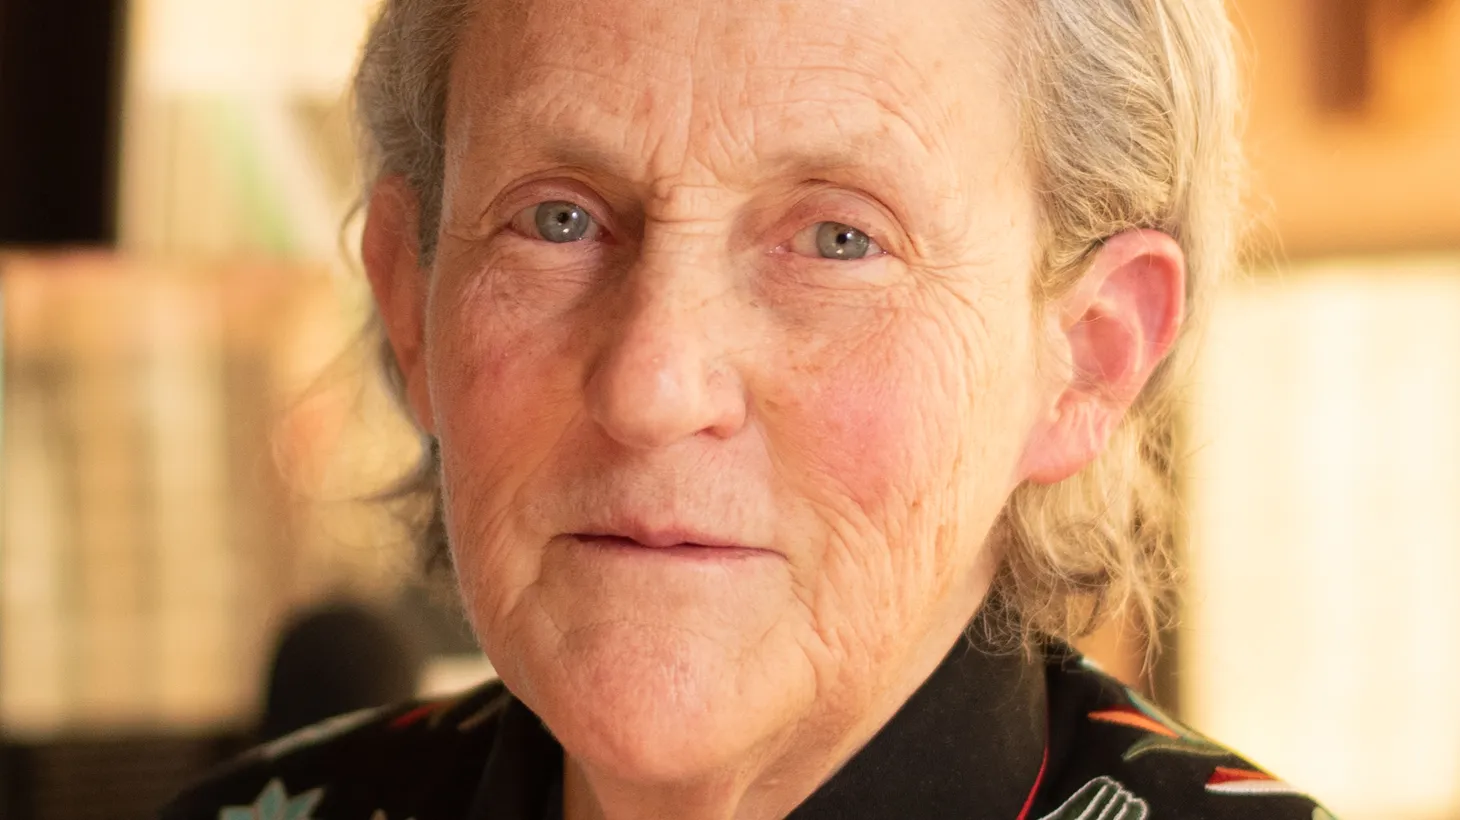 “I’m an object visualizer, who thinks in photorealistic pictures. The kind of stuff we're good at is mechanical things, art, and animals and photography,” says Temple Grandin.